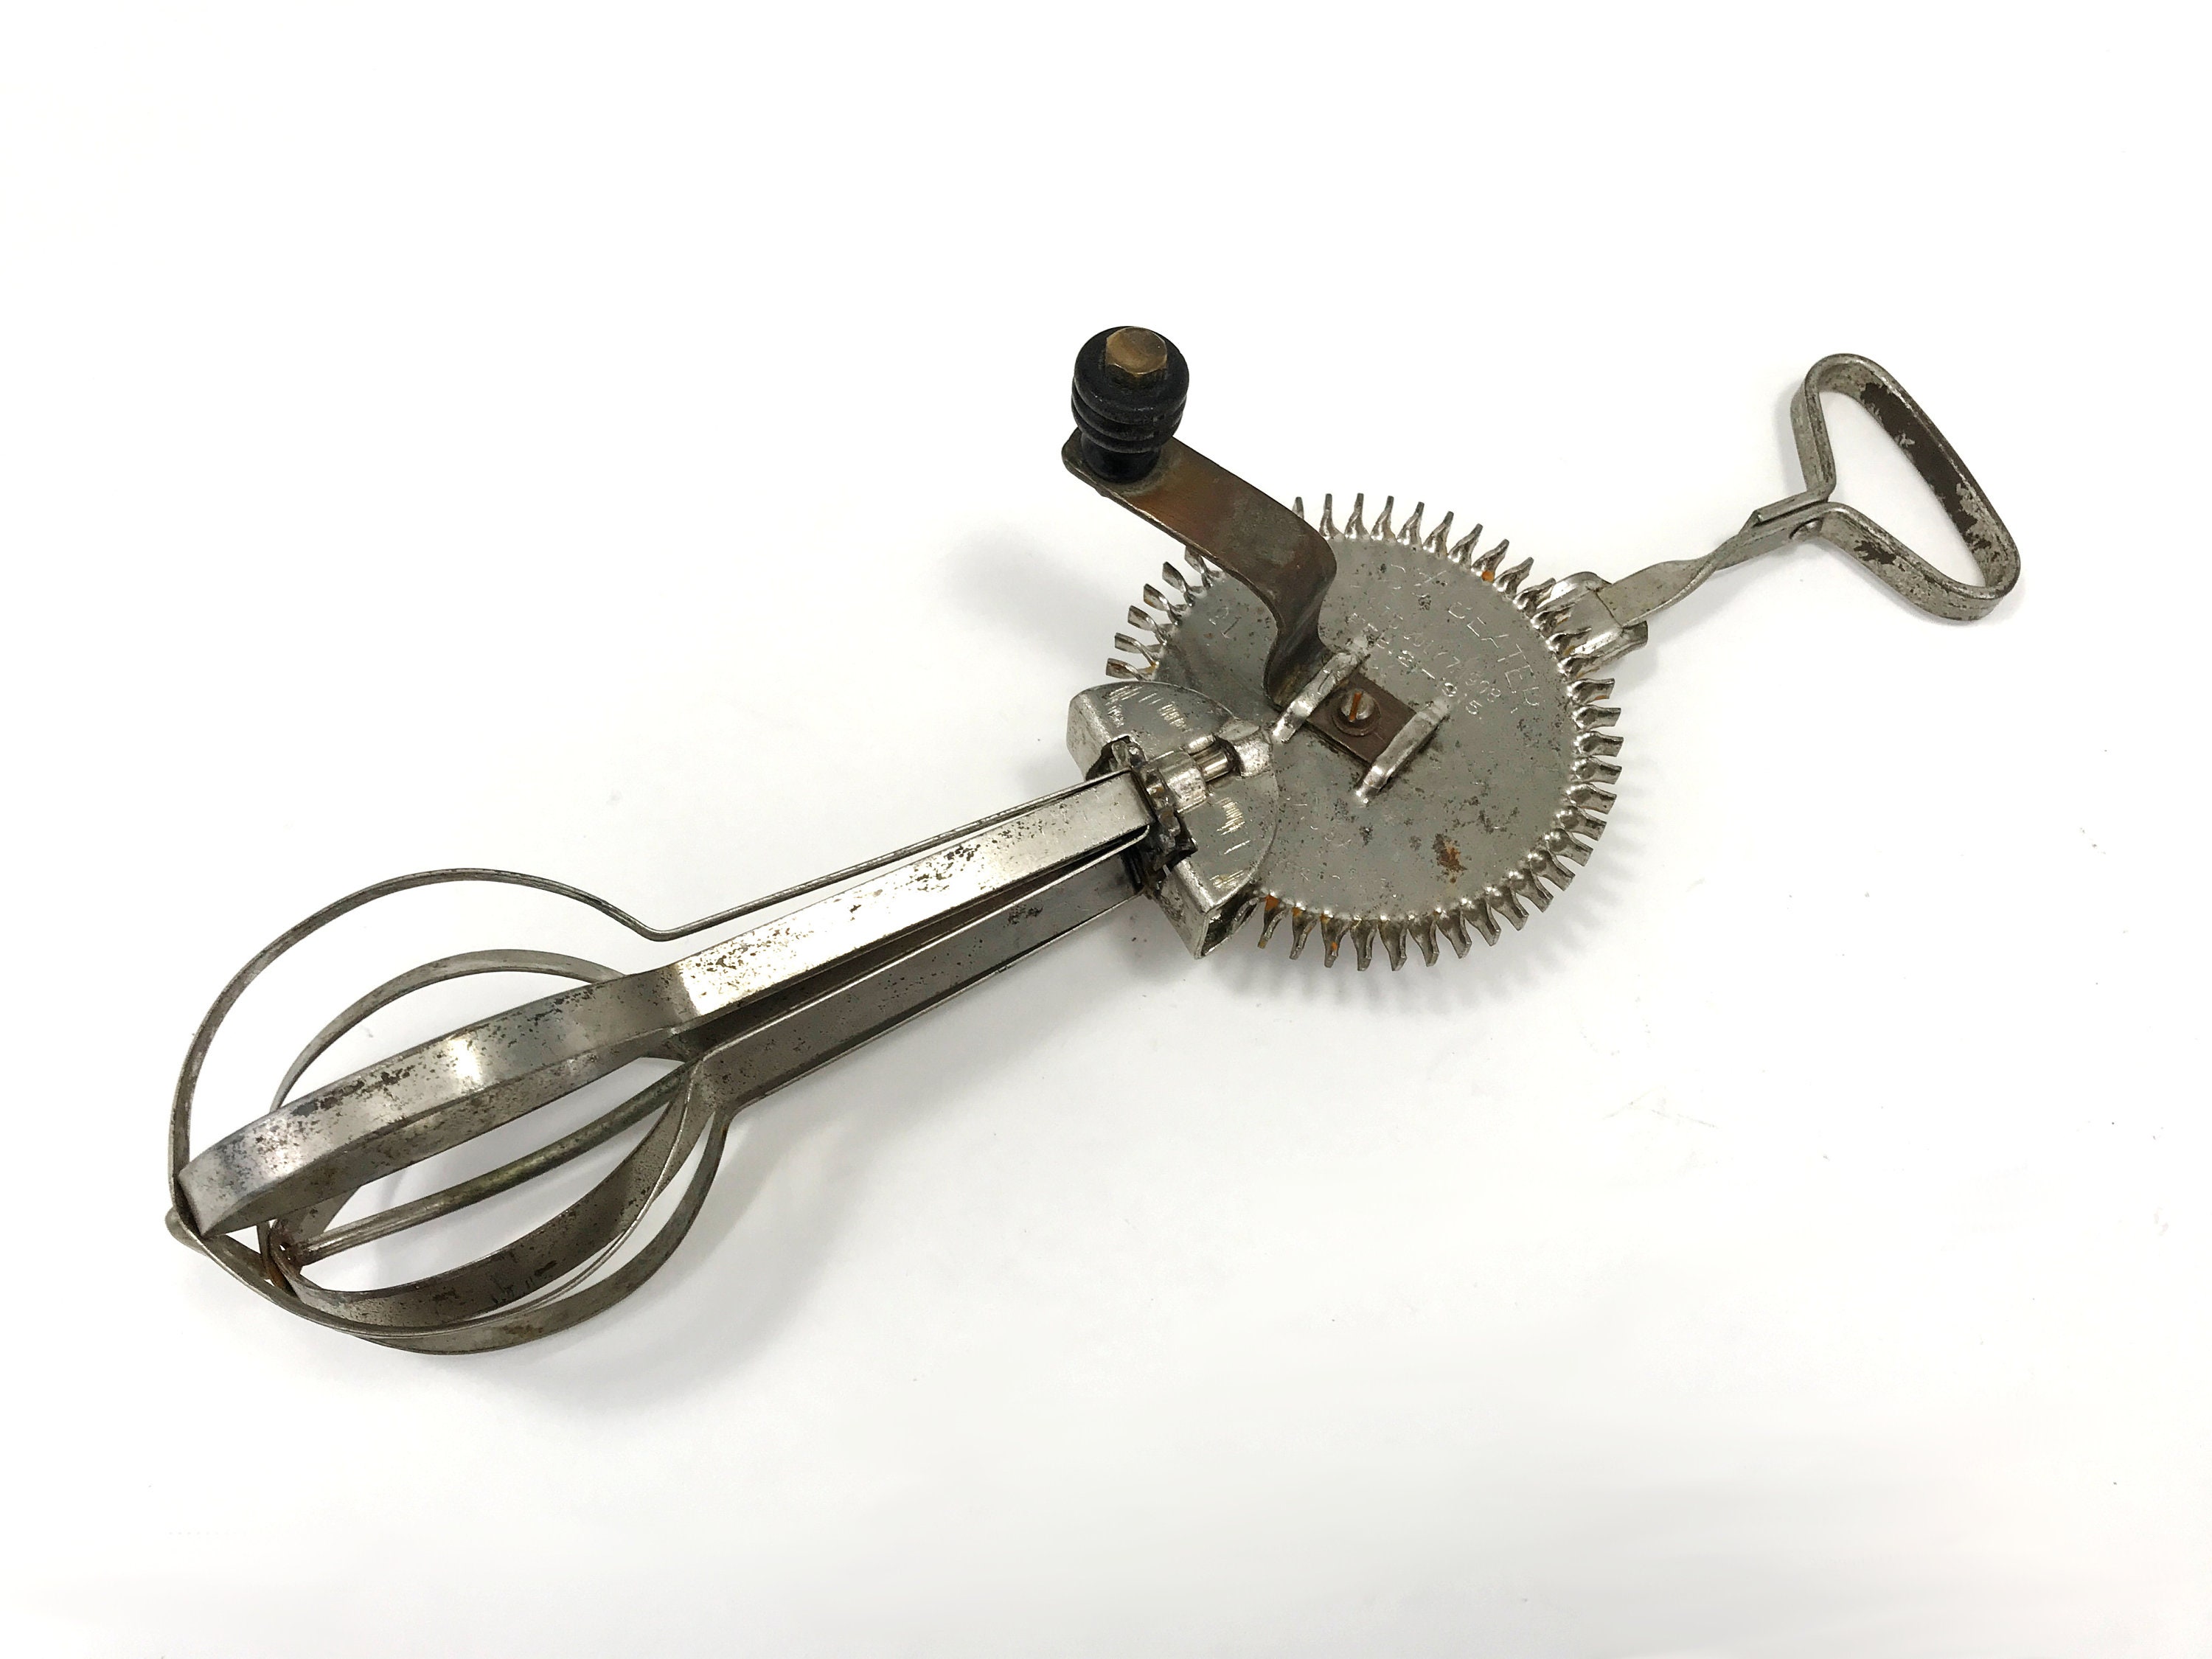 Antique Rustic Rotary Hand Egg Beater With Metal Handle, US Patent, Vintage Hand  Held Mixer, Vintage Egg Beater 